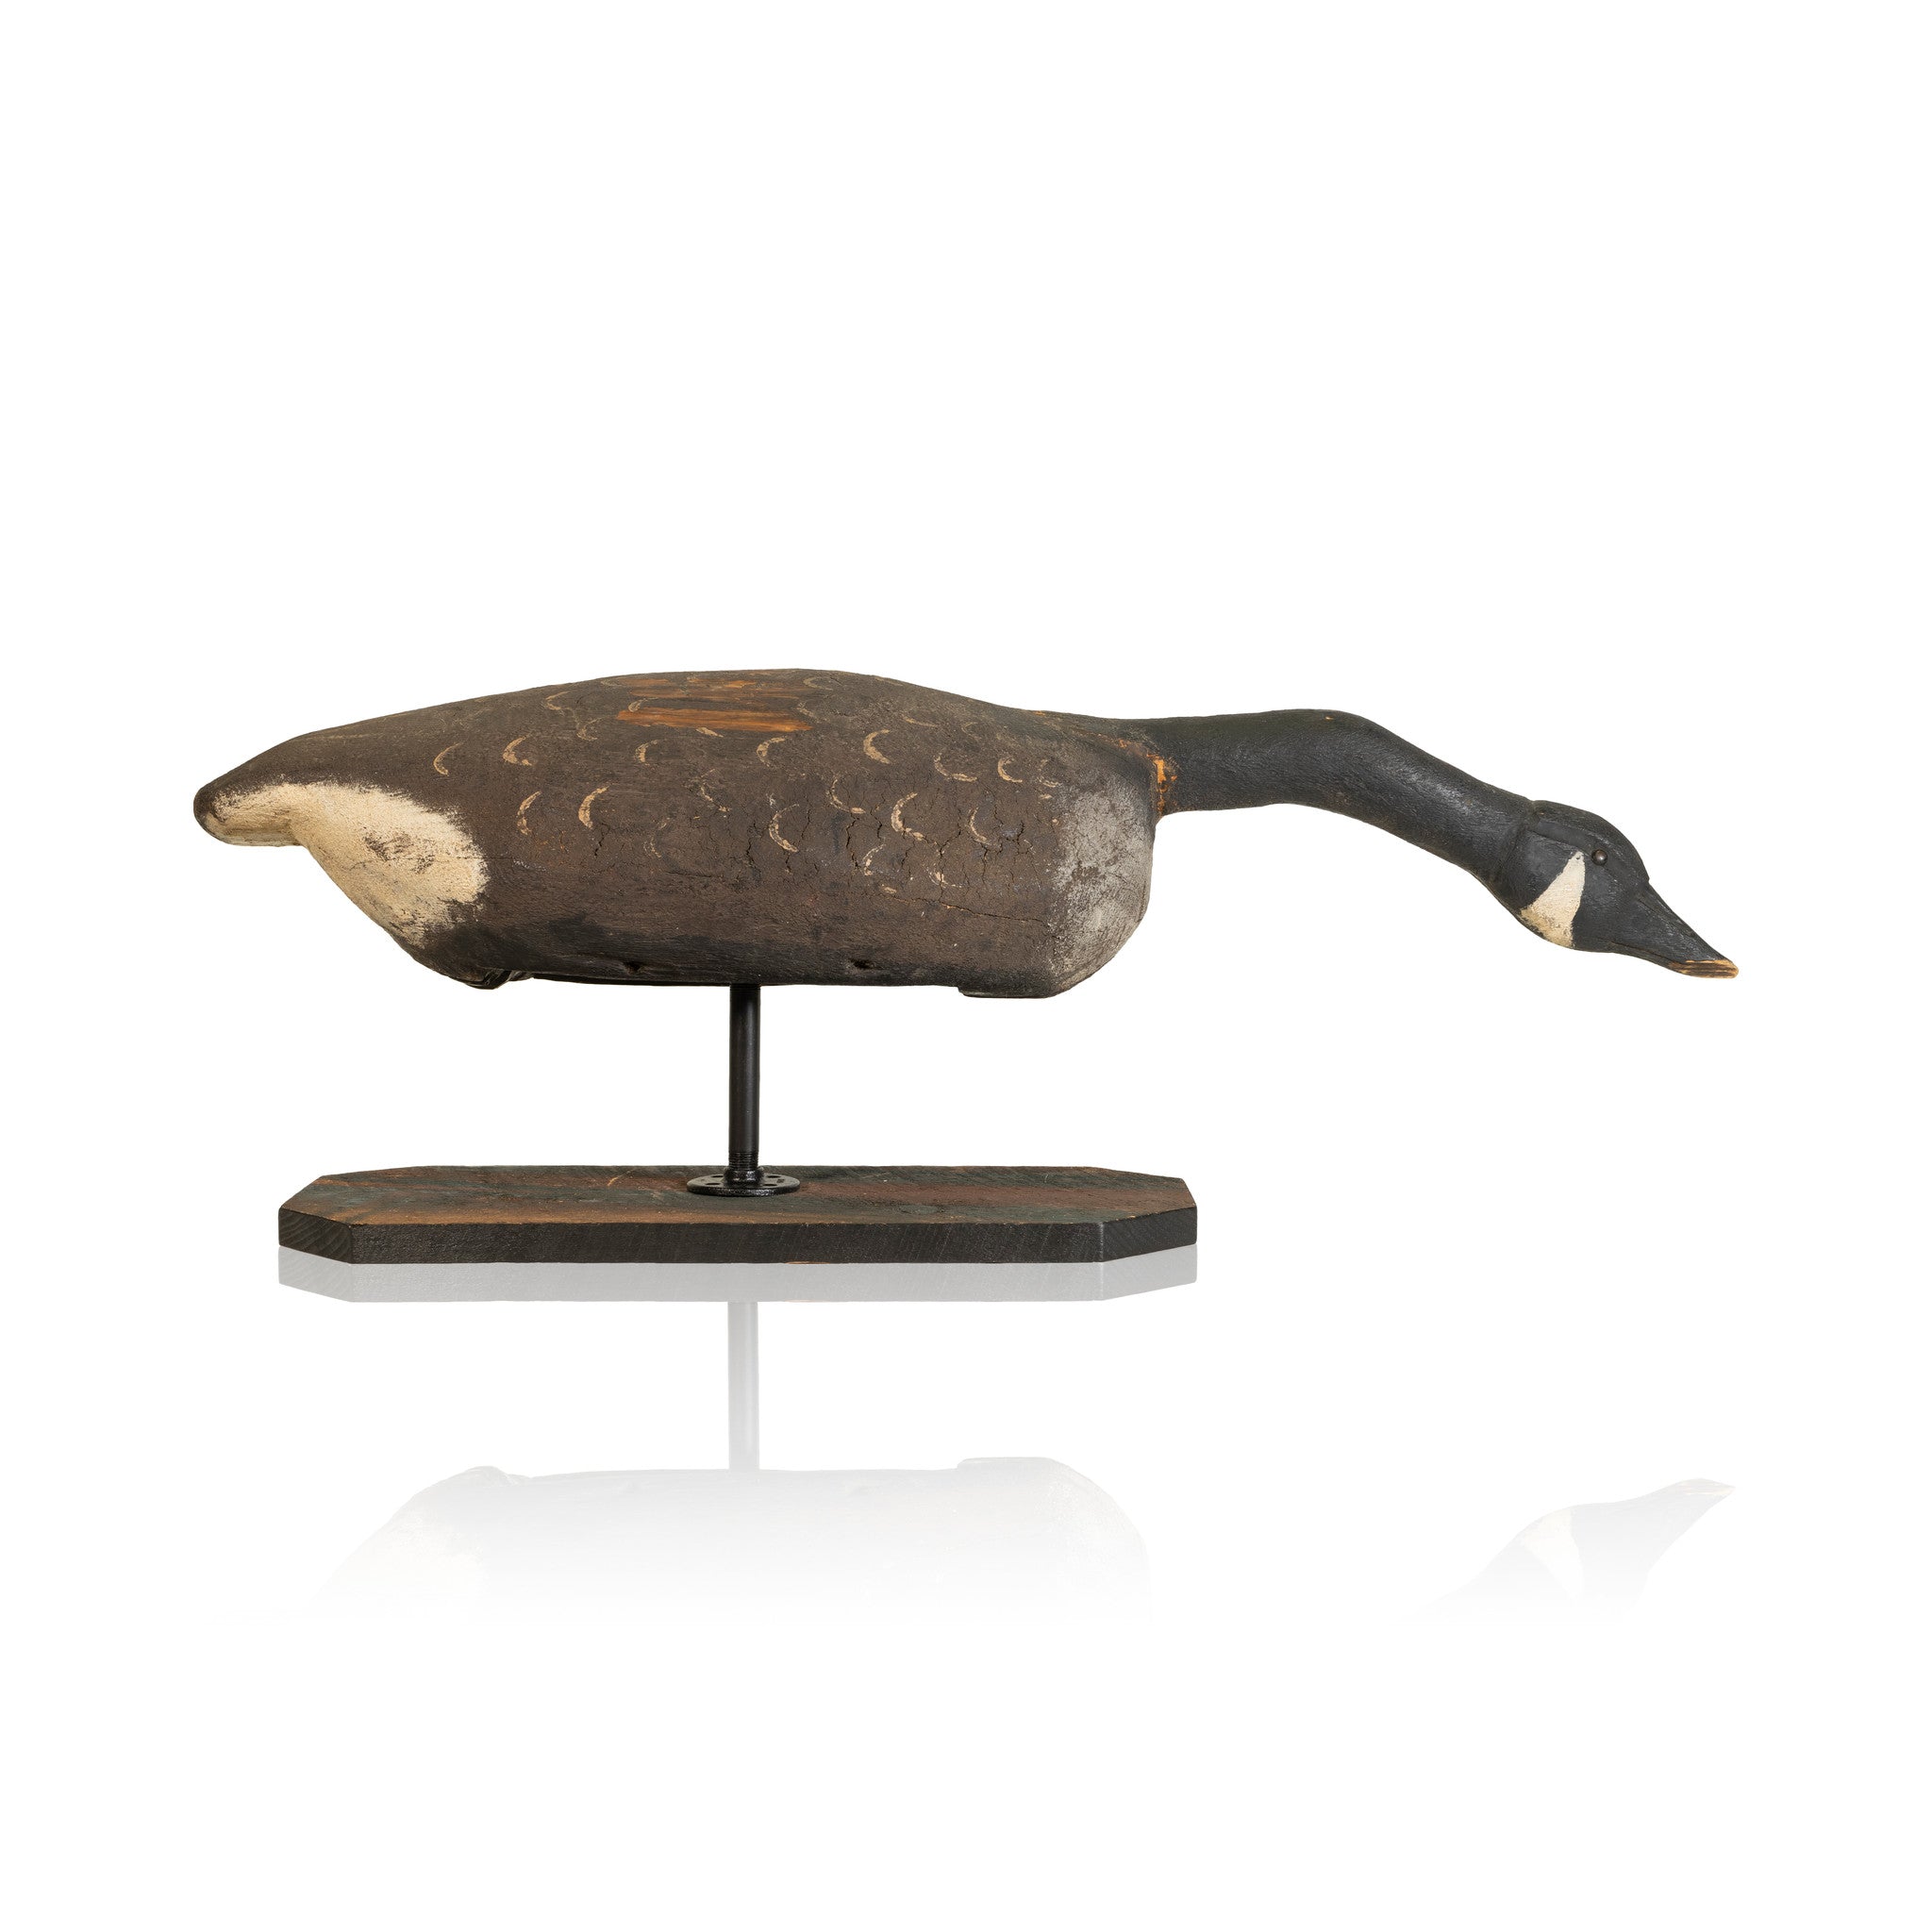 Canadian Goose Decoy, Sporting Goods, Hunting, Waterfowl Decoy